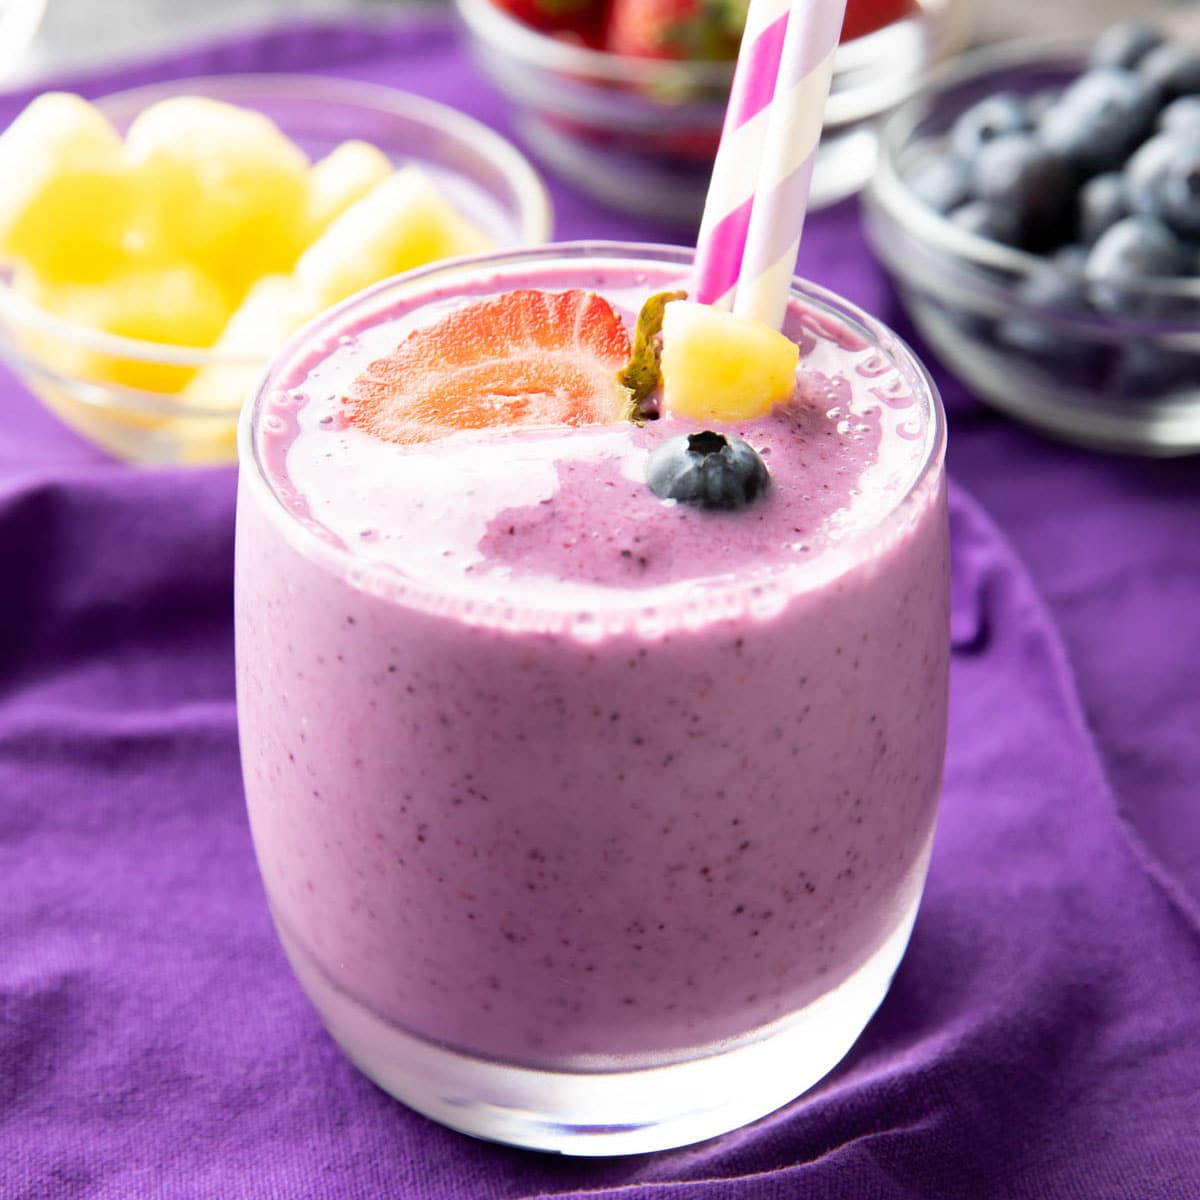 Berry Pineapple Smoothie served with pineapples, blueberries, and strawberries